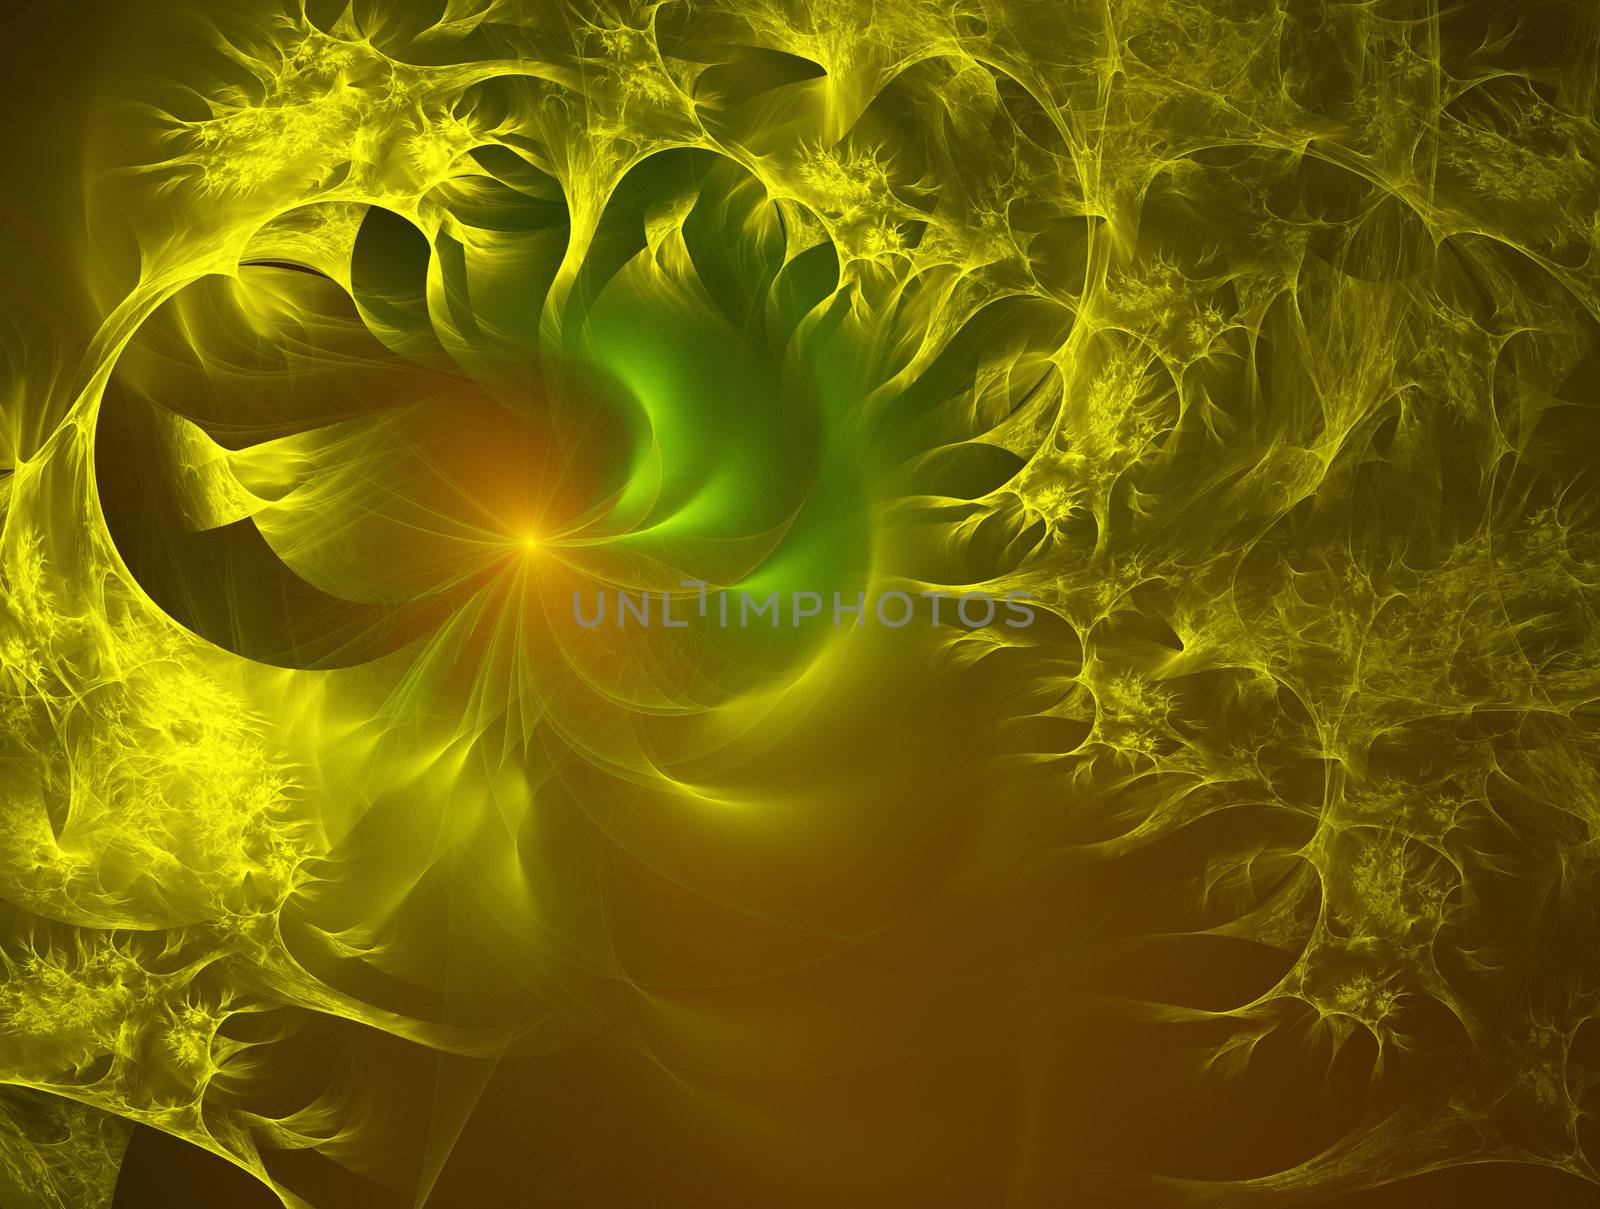 A fractal generated in Apophysis resembling fames from a point of light.